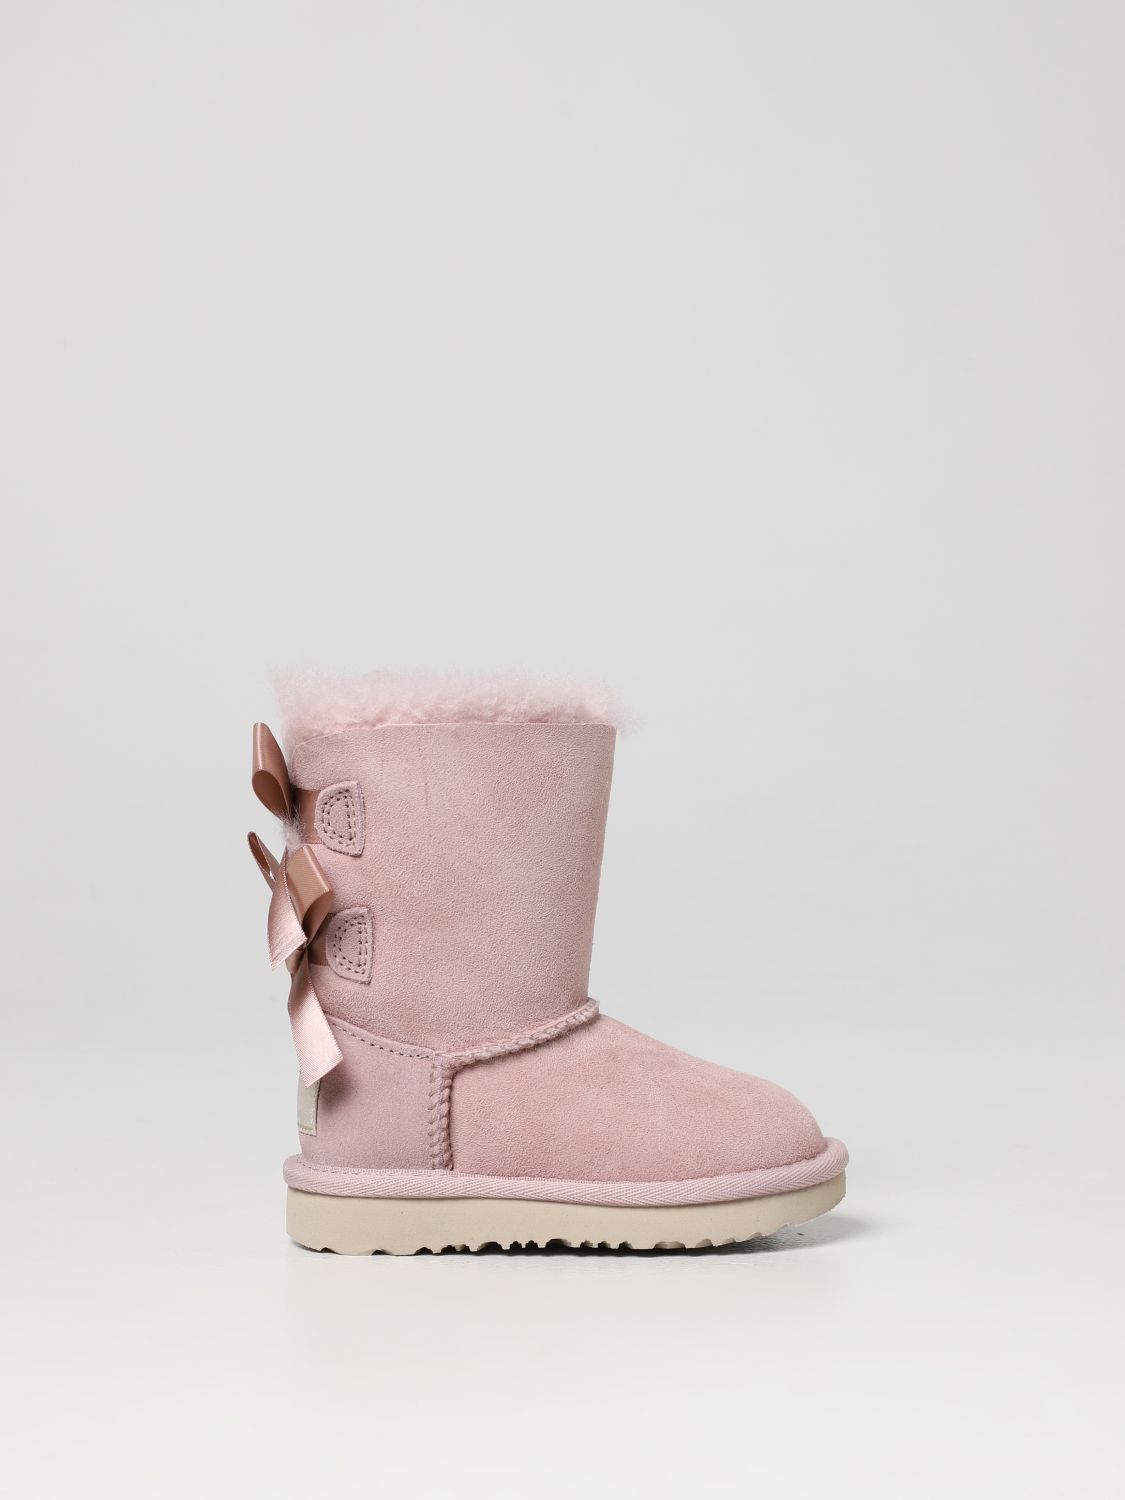 Scarpe Ugg: Stivaletto Bailey Bow II Ugg in suede rosa 1